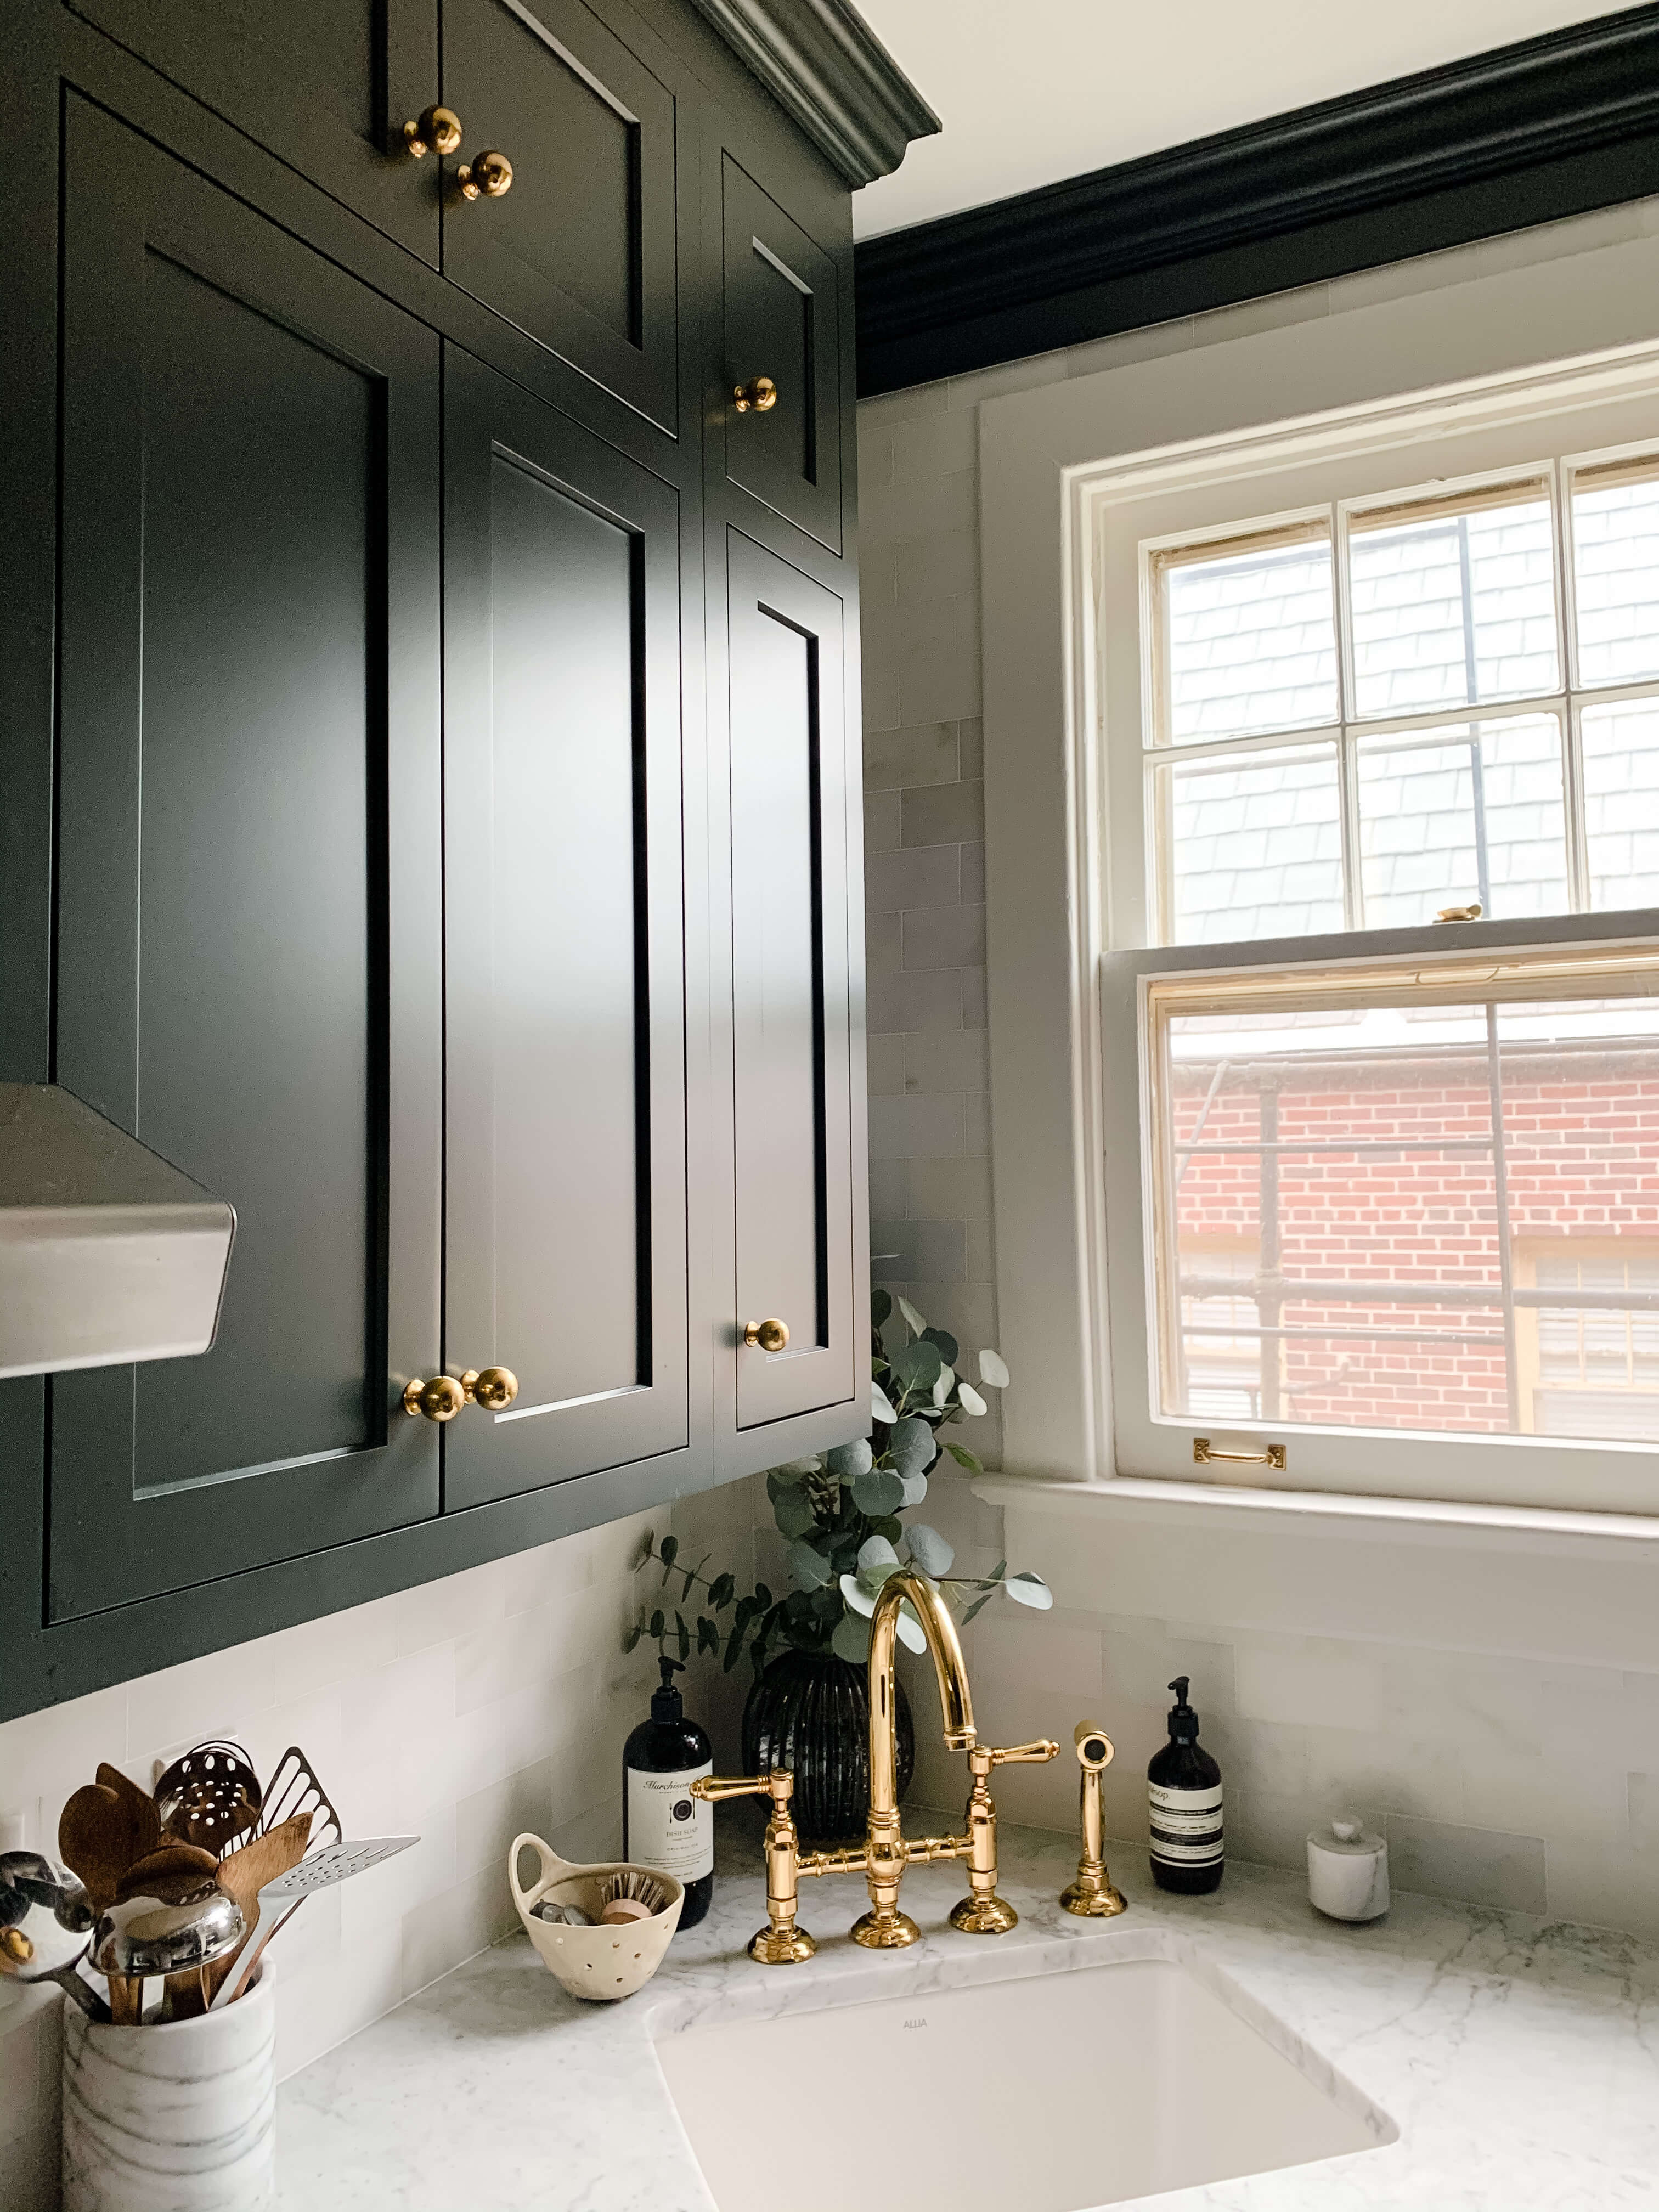 A dark deep green painted kitchen with inset cabinet doors in an old historic styled home. A cabinet knobs aand the corner kitchen sink faucet features brassy gold finishes to accent the dark green color palette. .